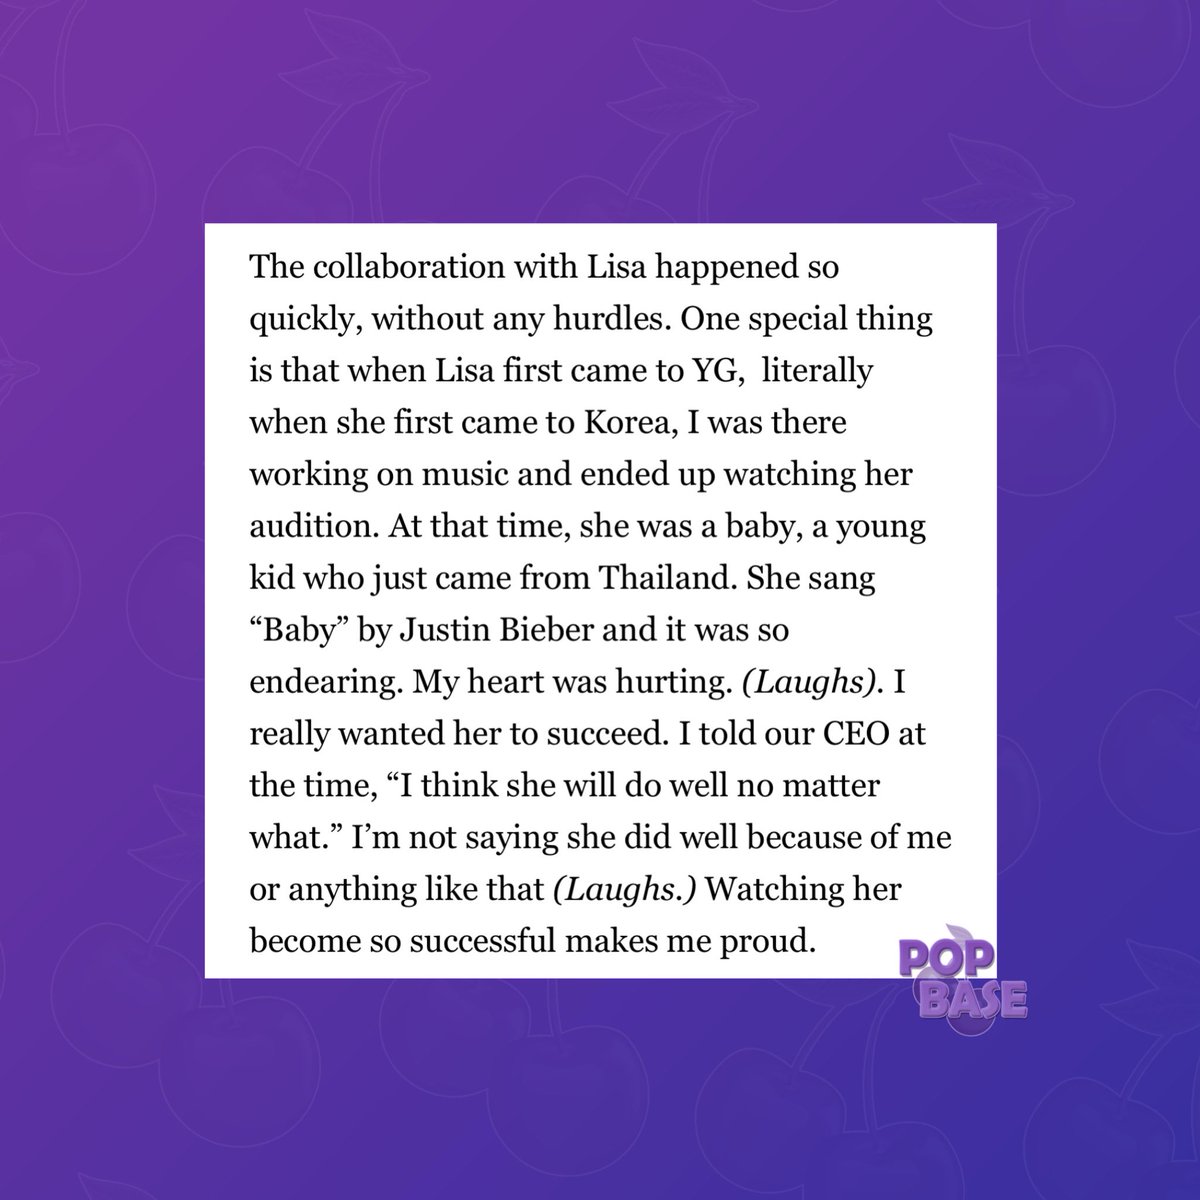 Taeyang recalls the time he first saw BLACKPINK's Lisa at the YG Ent. auditions:

“At that time, she was a baby, a young kid who just came from Thailand. (...) I really wanted her to succeed. I told our CEO at the time, “I think she will do well no matter what.” I’m not saying…